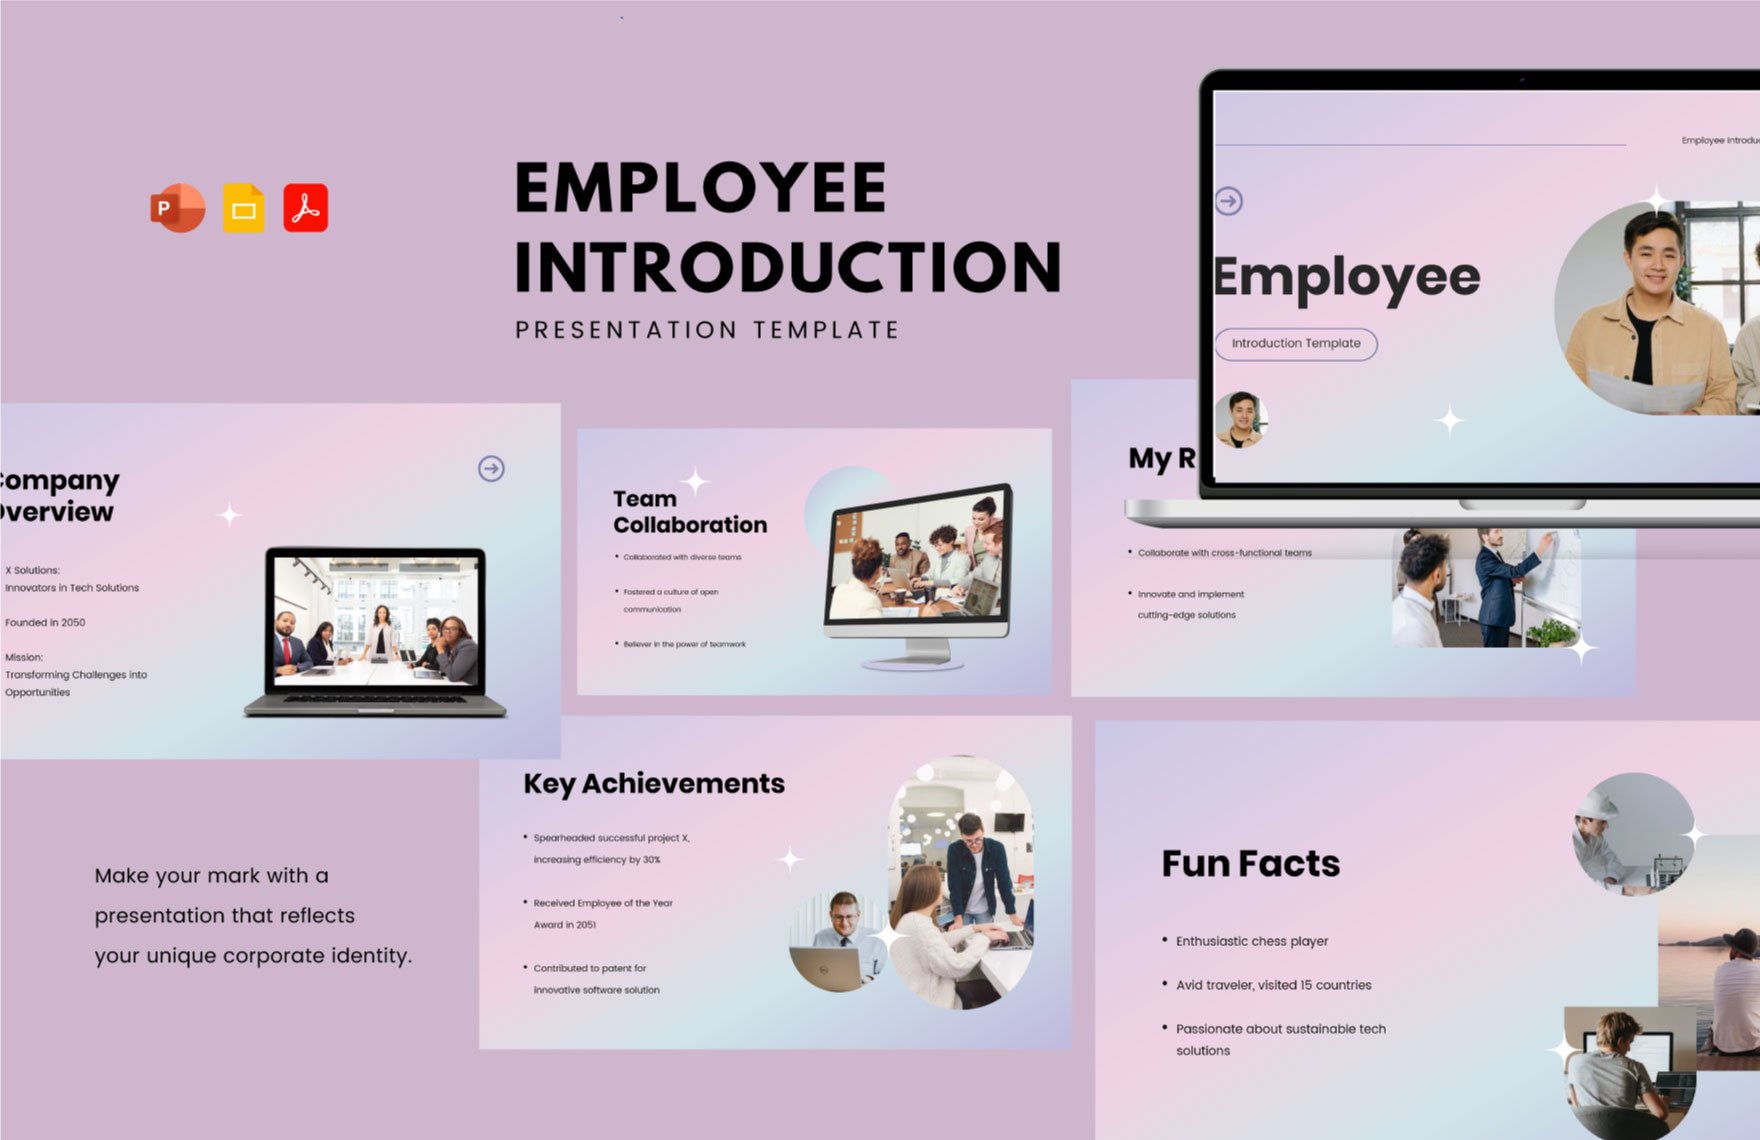 Employee Introduction Template in PDF, PowerPoint, Google Slides